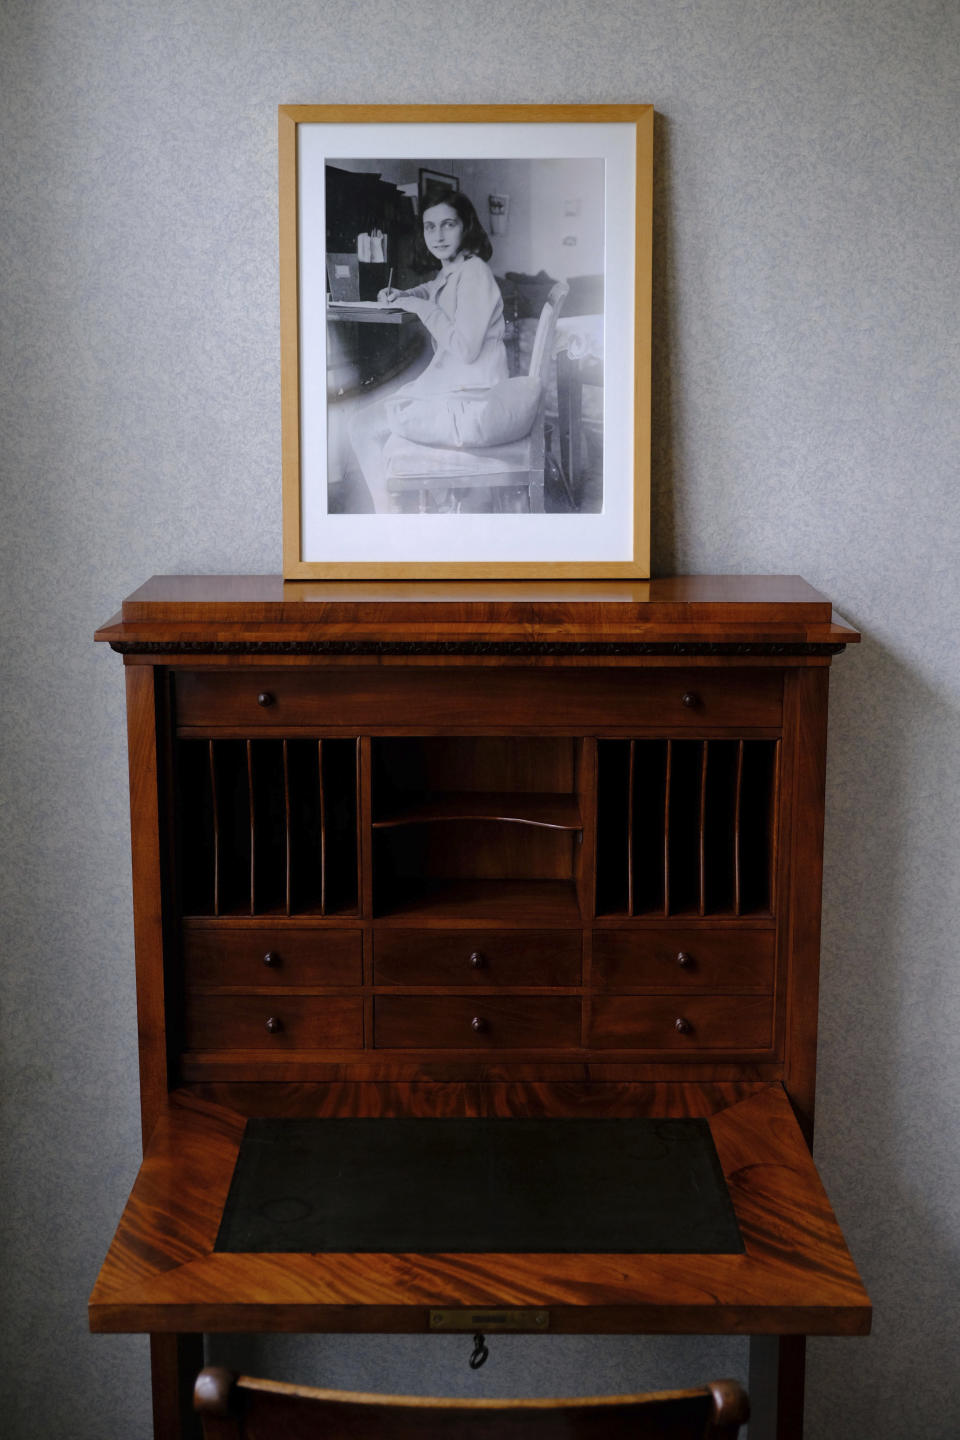 A photo of Anne Frank stands on a replica of the writing desk she once used in her family's former apartment in Amsterdam, during an event to mark what would have been Anne Frank's 90th birthday, in Amsterdam, Netherlands, Wednesday, June 12, 2019. On the day Anne Frank would have turned 90, the museum dedicated to keeping alive her story has brought together schoolchildren and two of the Jewish diarist's friends at the apartment where she lived with her family before going into hiding from Nazis who occupied the Netherlands during World War II. (AP Photo/Michael C. Corder)